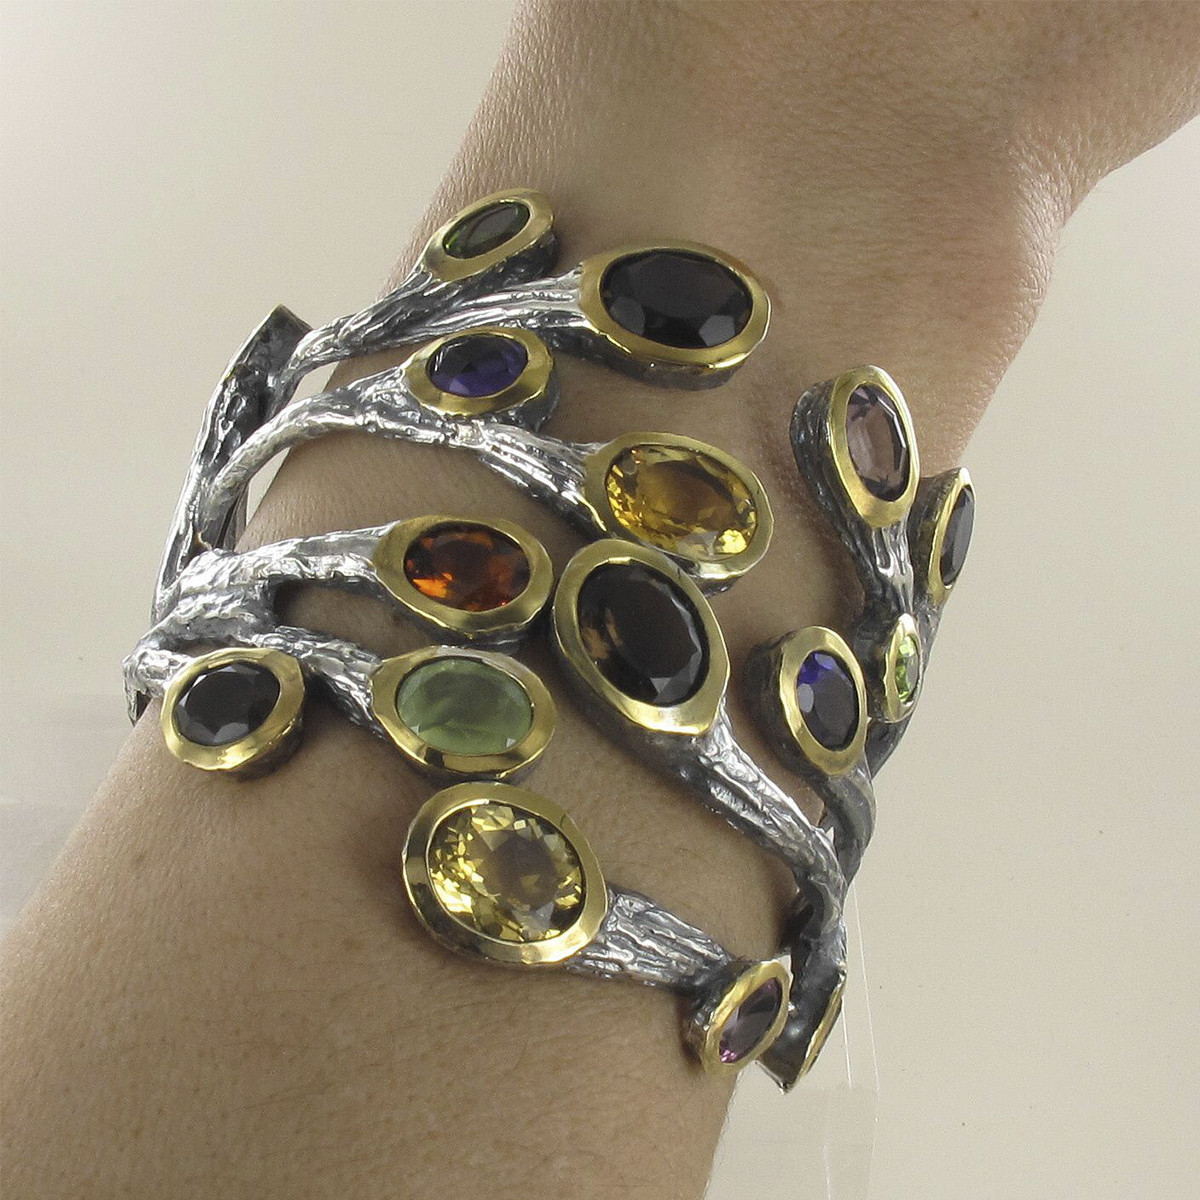 SILVER AND GOLD BRANCH-SHAPED BRACELET WITH STONES